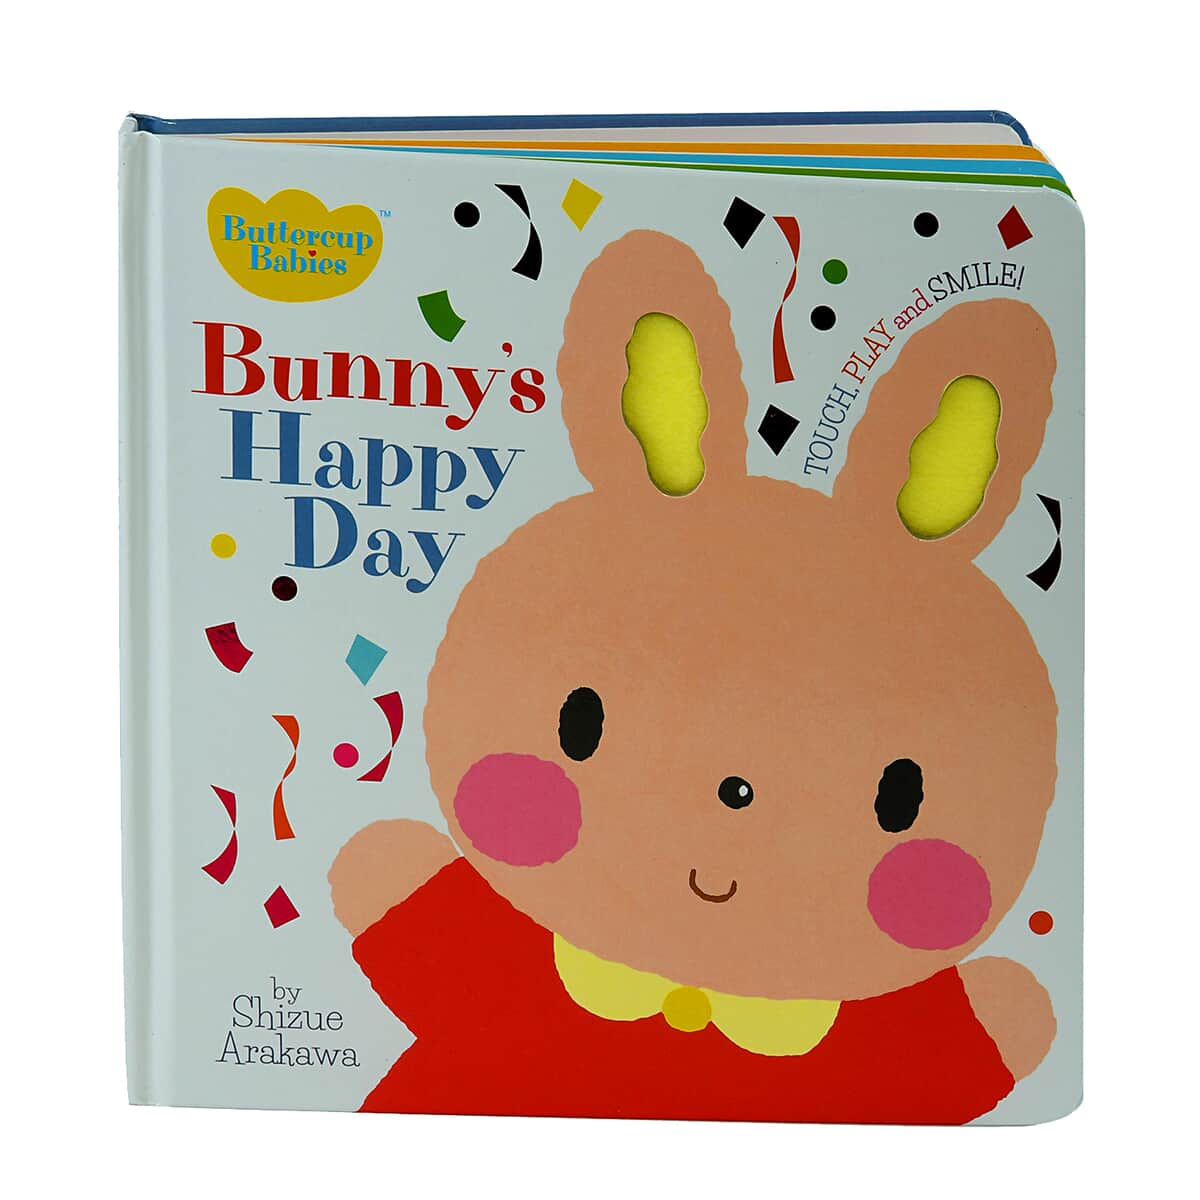 VALUE BUY Buttercup Babies Bunny's Happy Day Children's Book image number 0